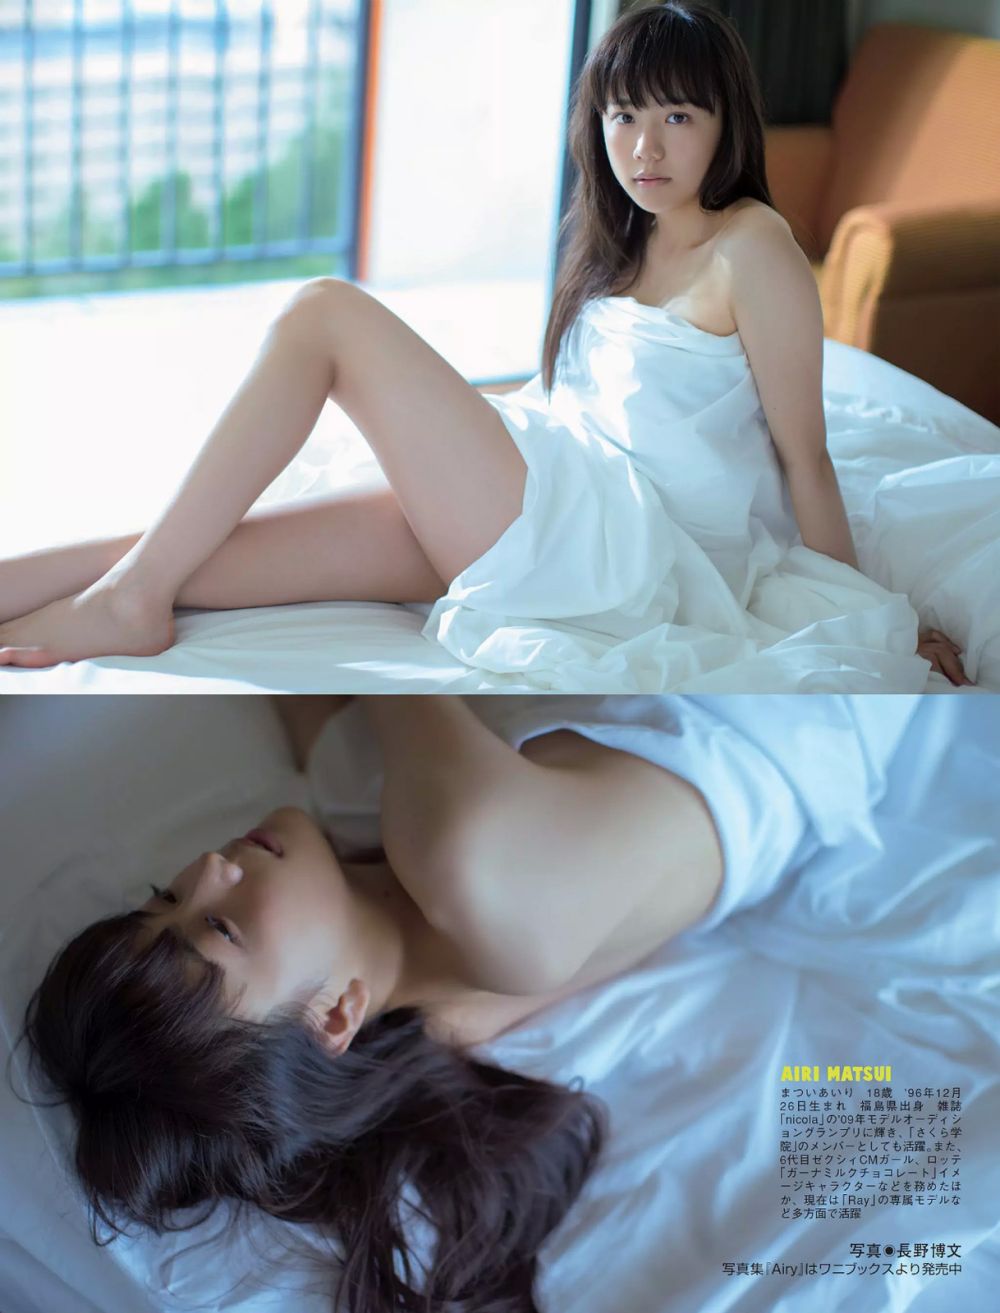 Airi Matsui Sexy and Hottest Photos , Latest Pics